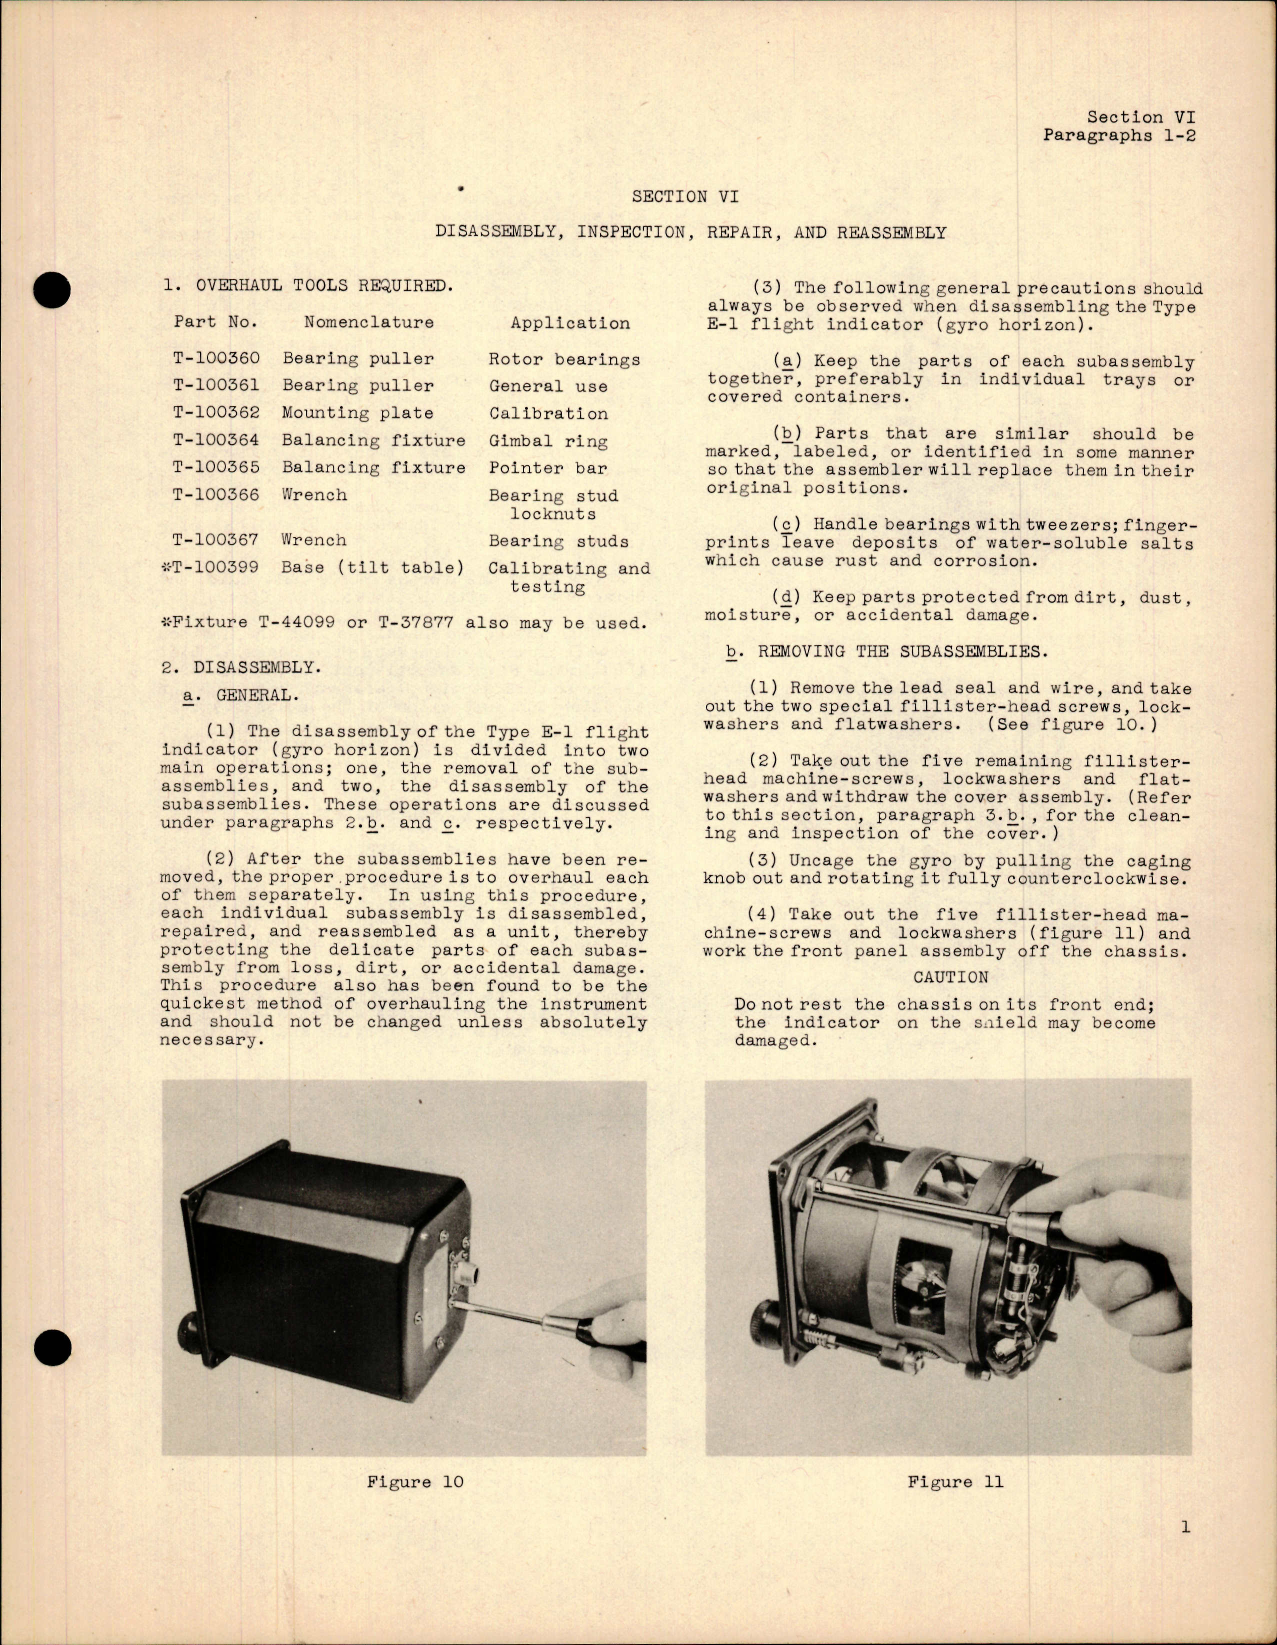 Sample page 5 from AirCorps Library document: Overhaul Instructions for Sperry Flight Indicator, Type E-1